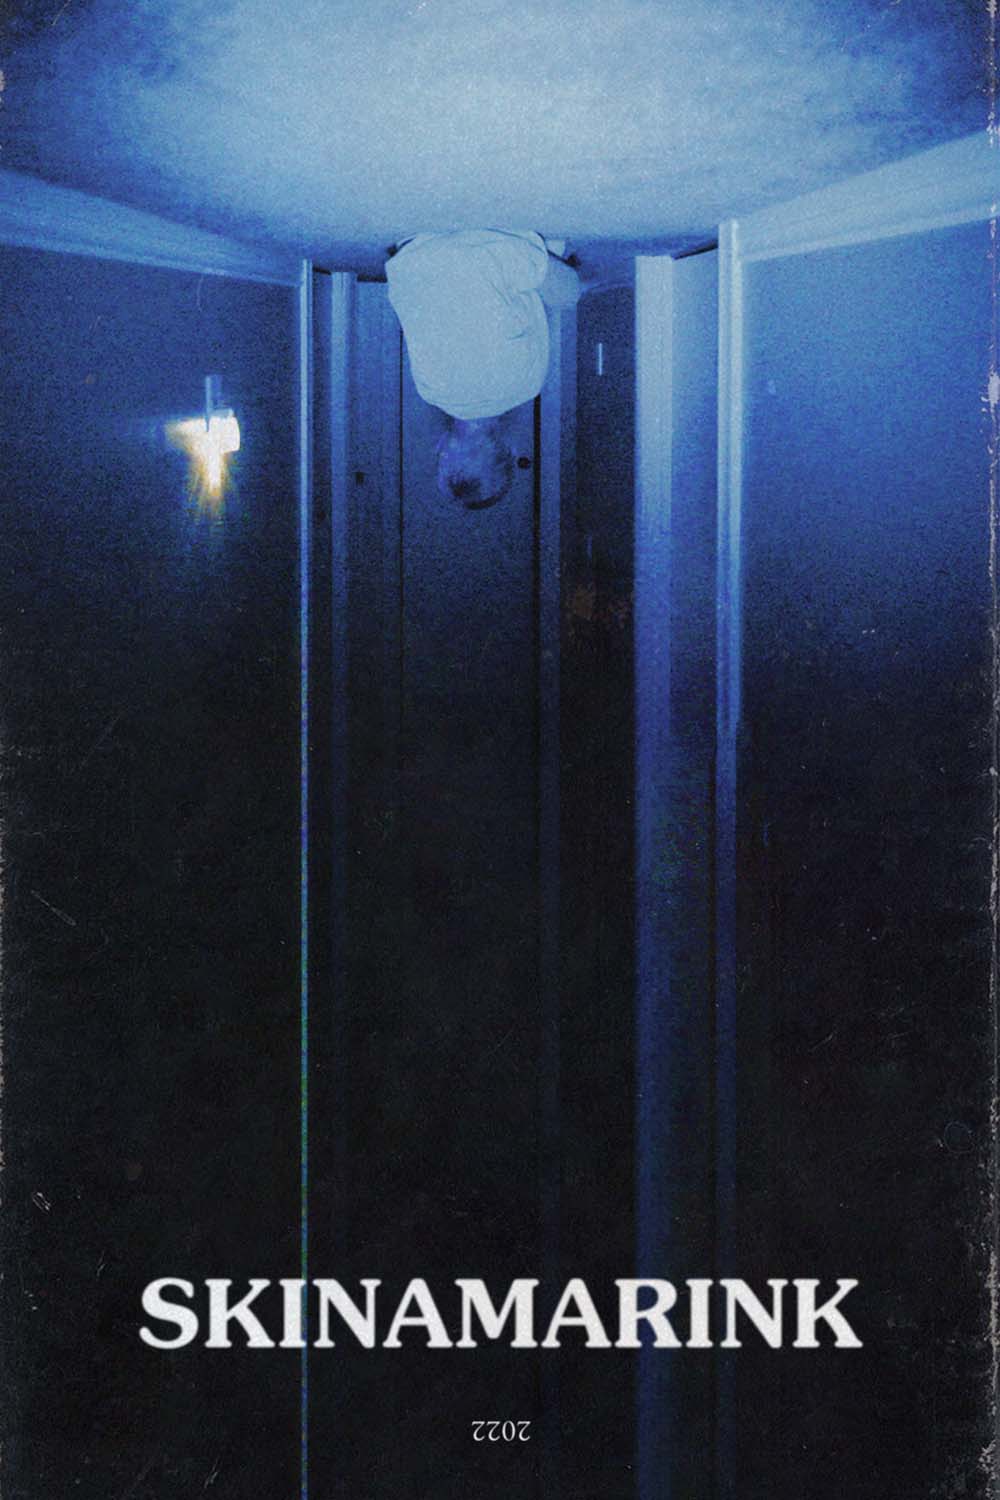 Upside down image of a boy in a hallway, staring at an opening door